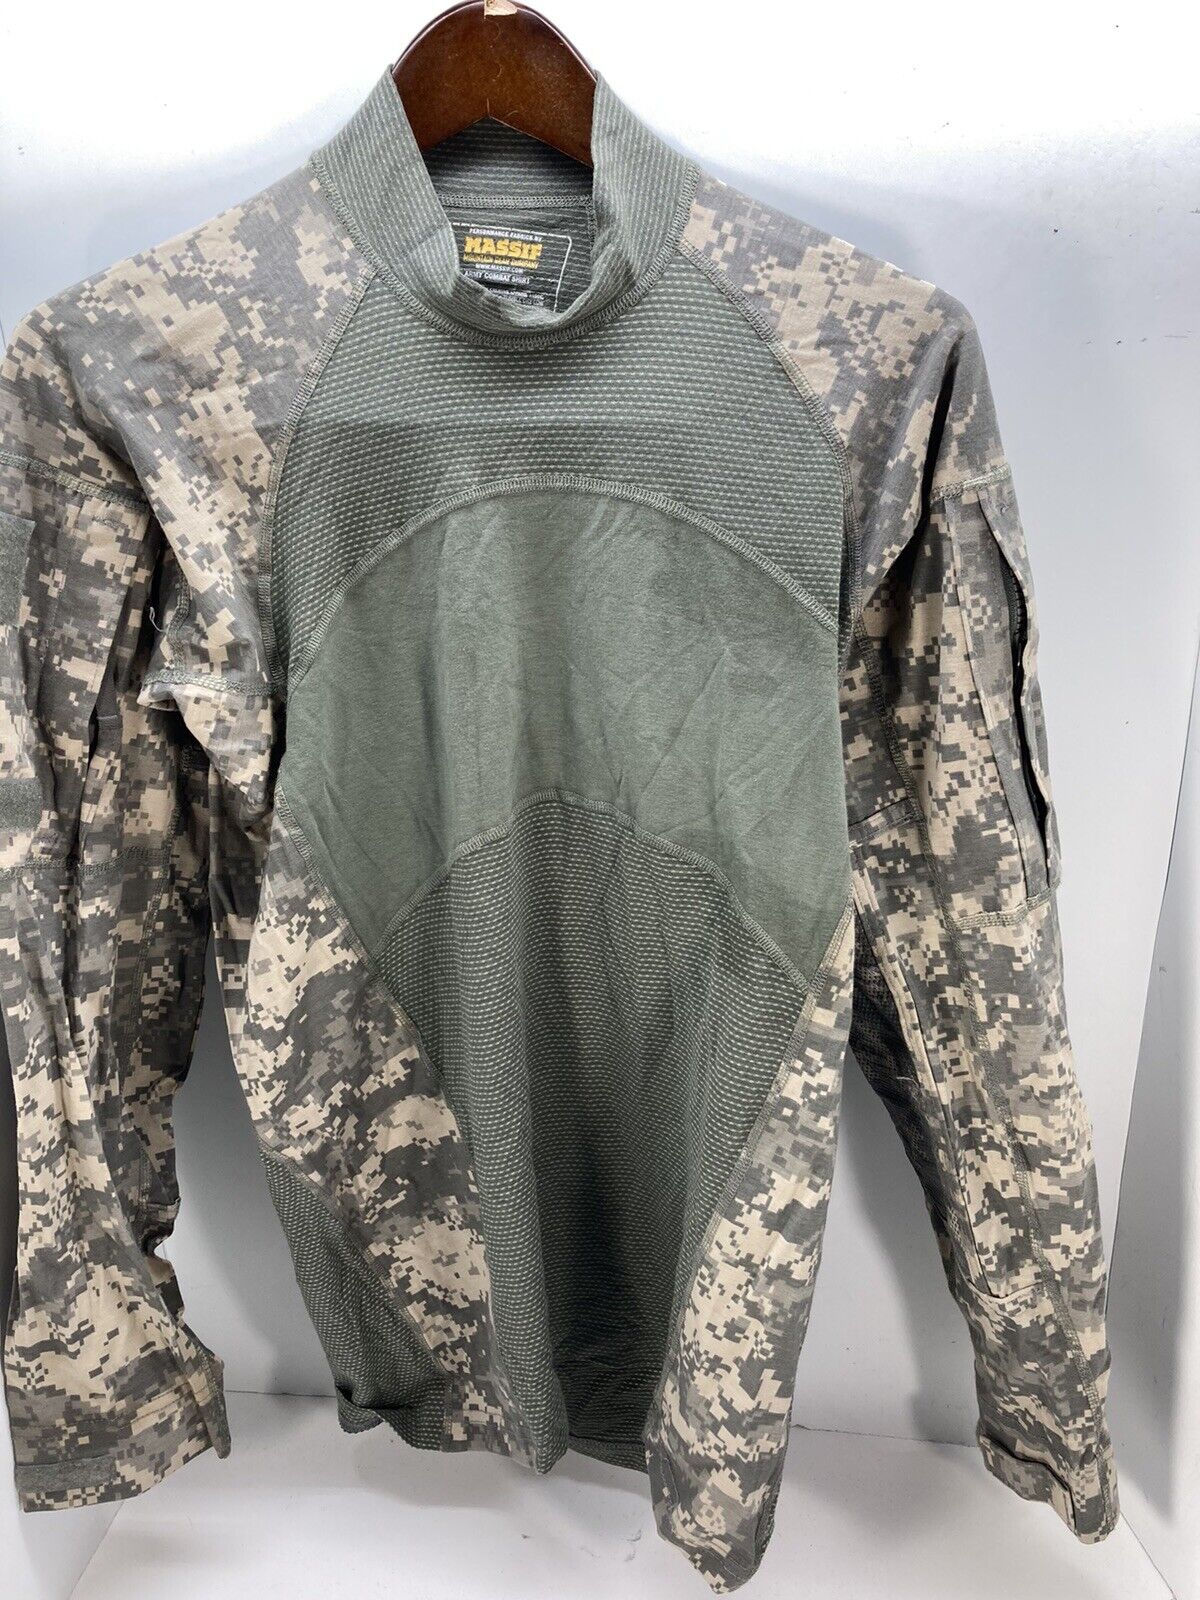 Massif US ARMY COMBAT SHIRT Flame Resistant ACU CAMO Med Padded Elbow Free S/H